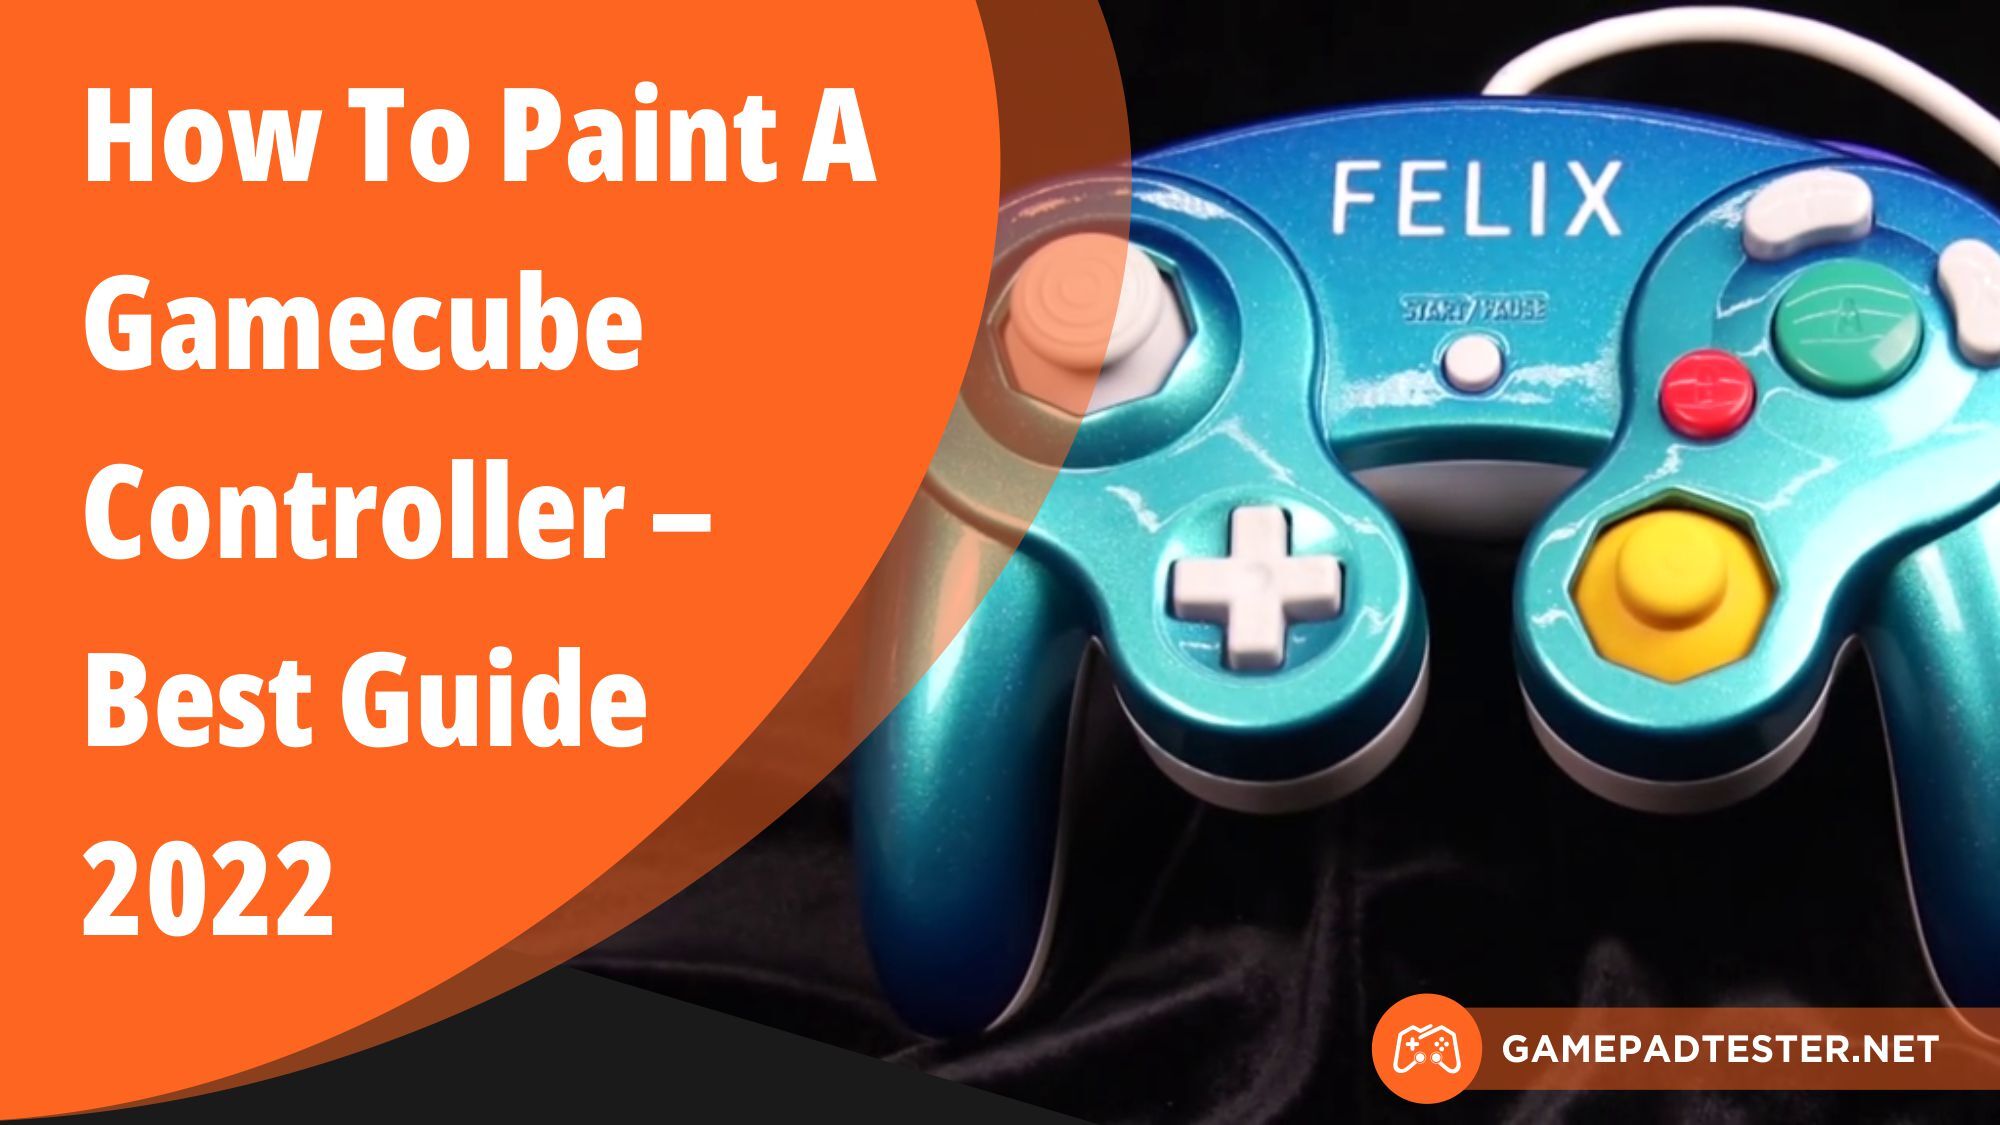 How To Paint Gamecube Controller